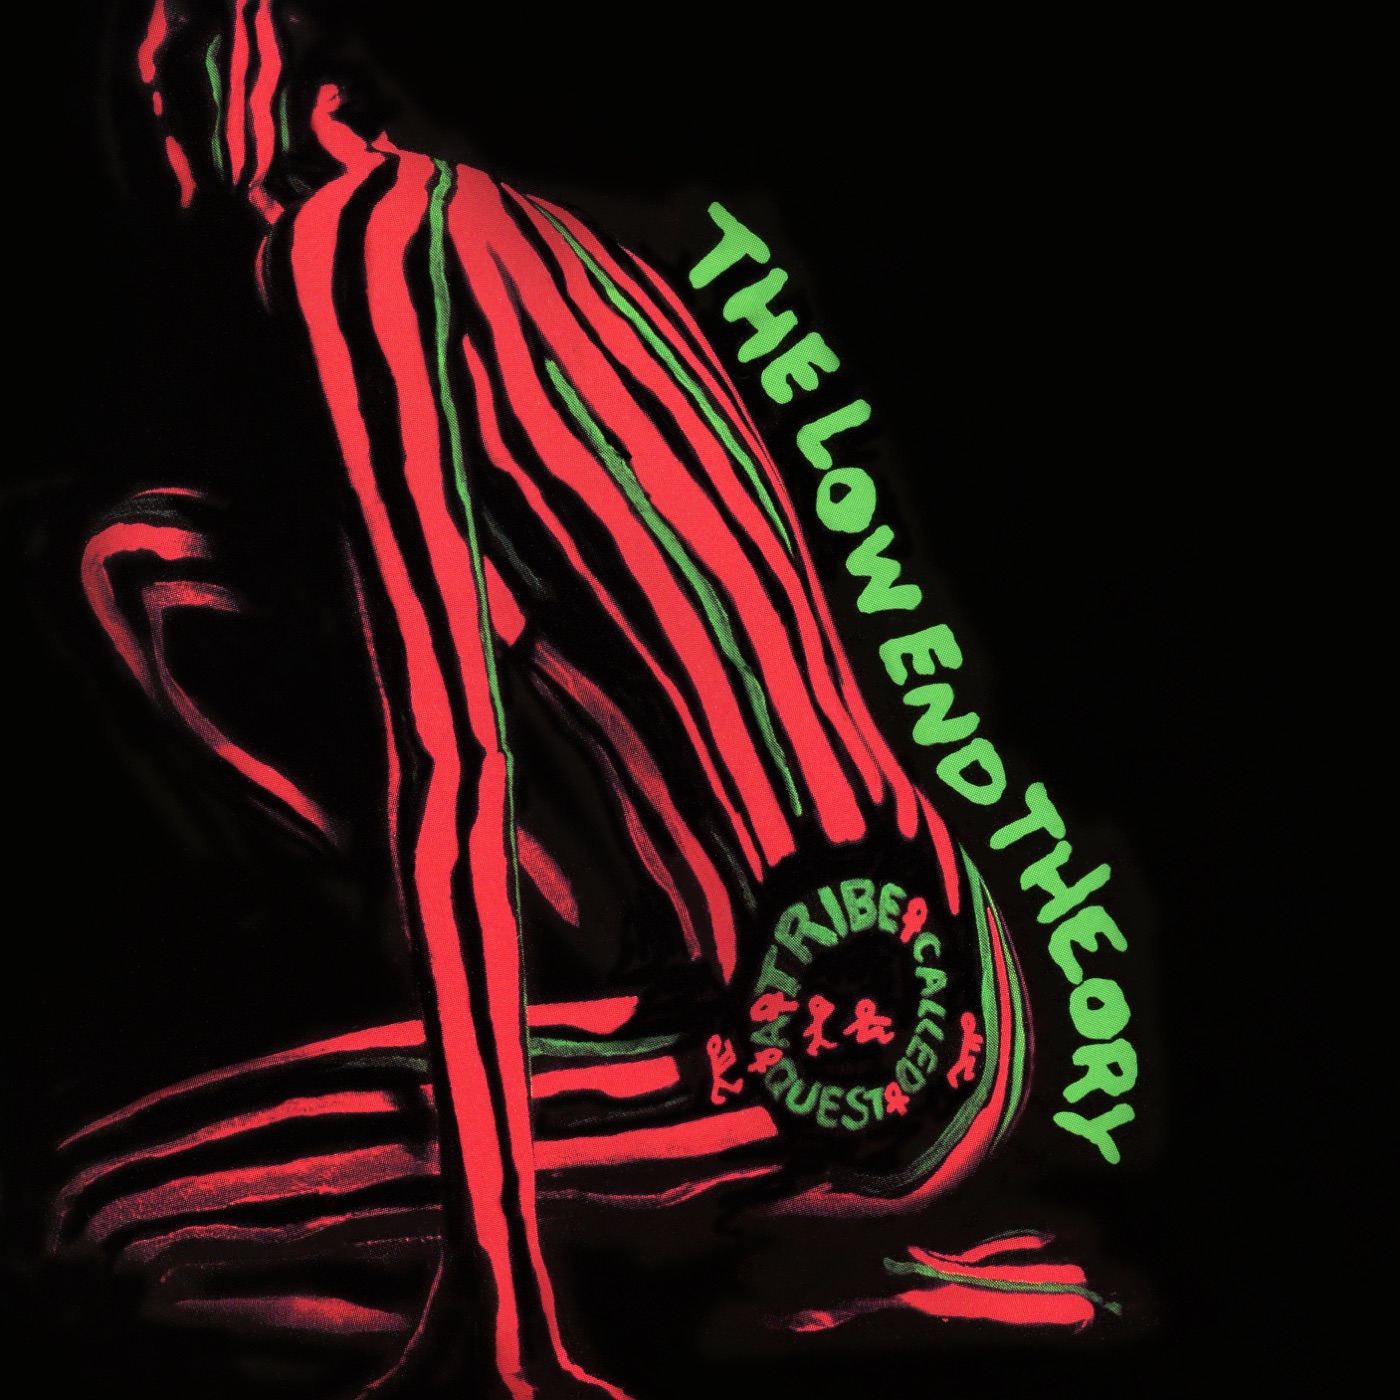 The Low End Theory by A Tribe Called Quest